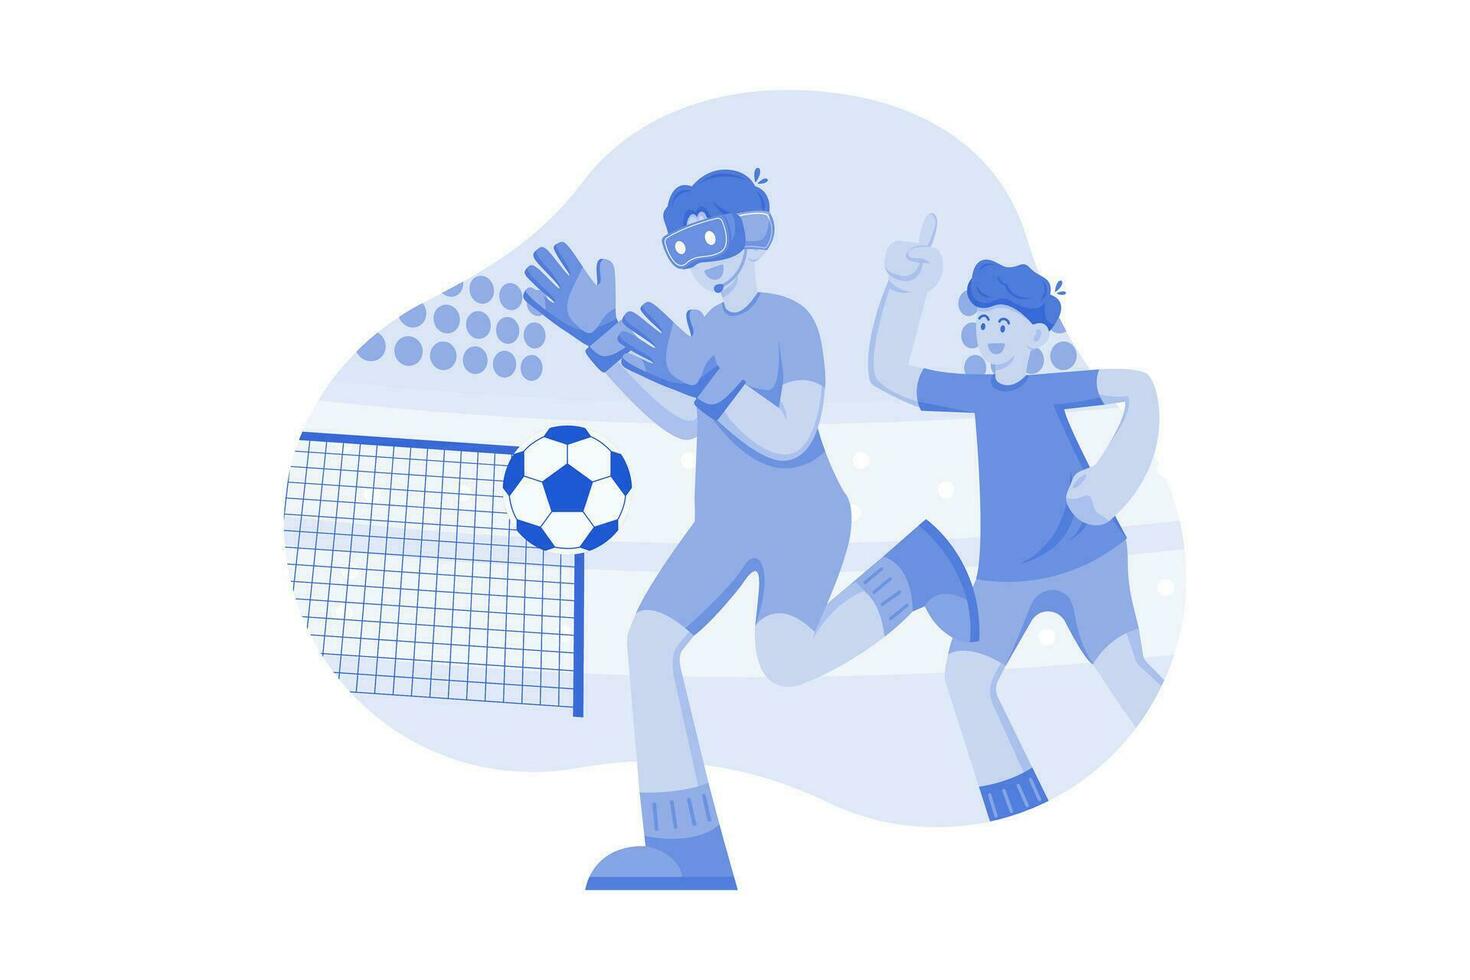 Sports Games Virtual Concept Illustration concept on white background vector